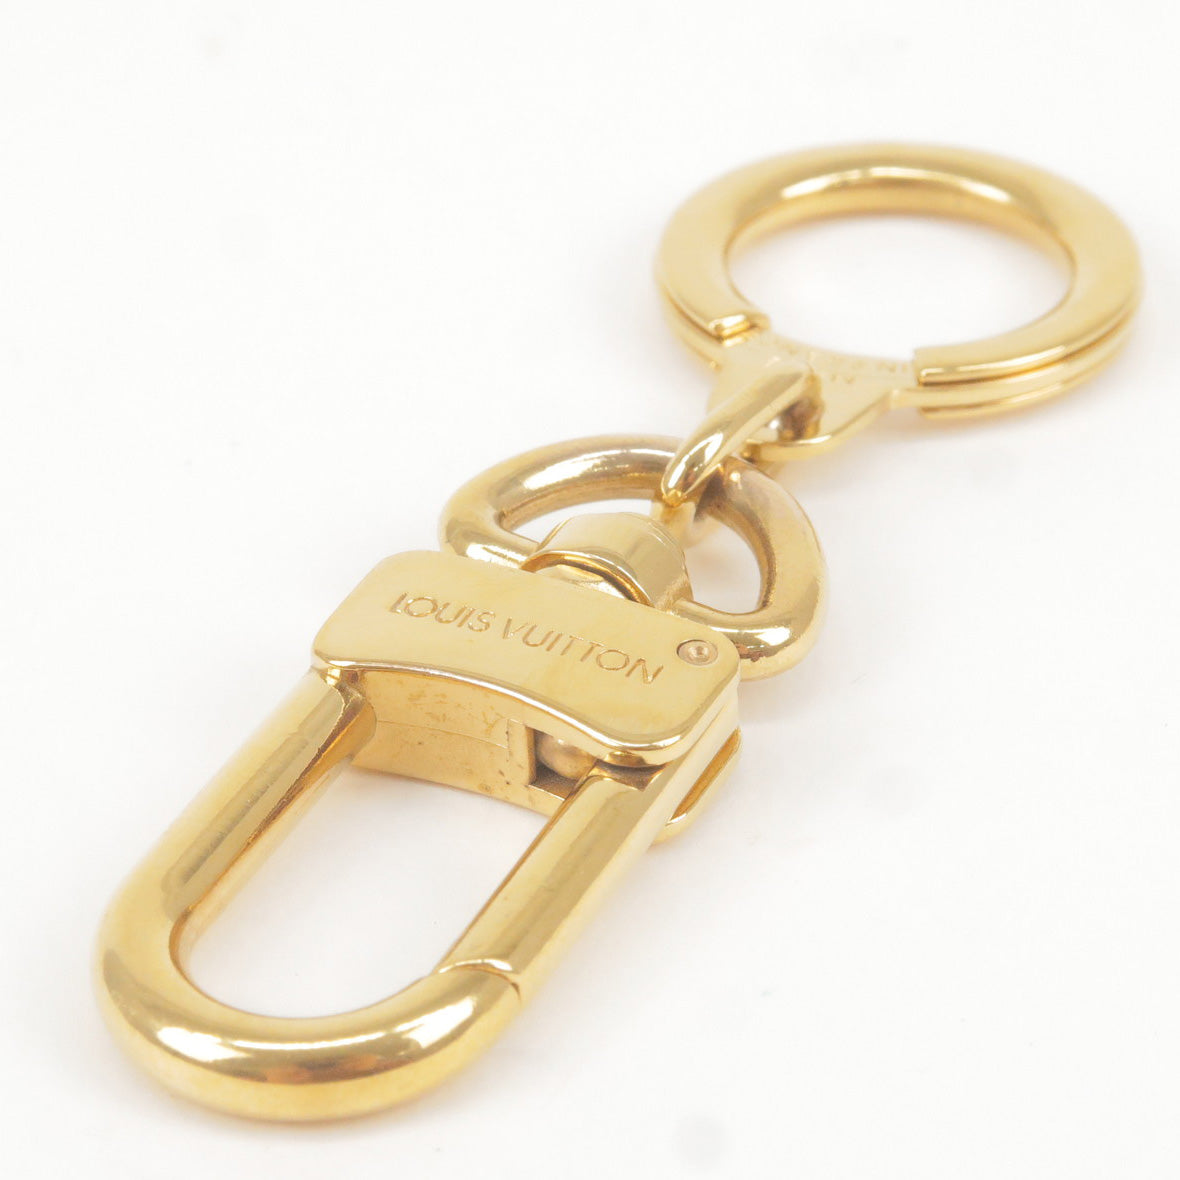 Authentic-Louis-Vuitton-Chenne-Ano-Cles-Key-Chain-Key-Charm-Gold